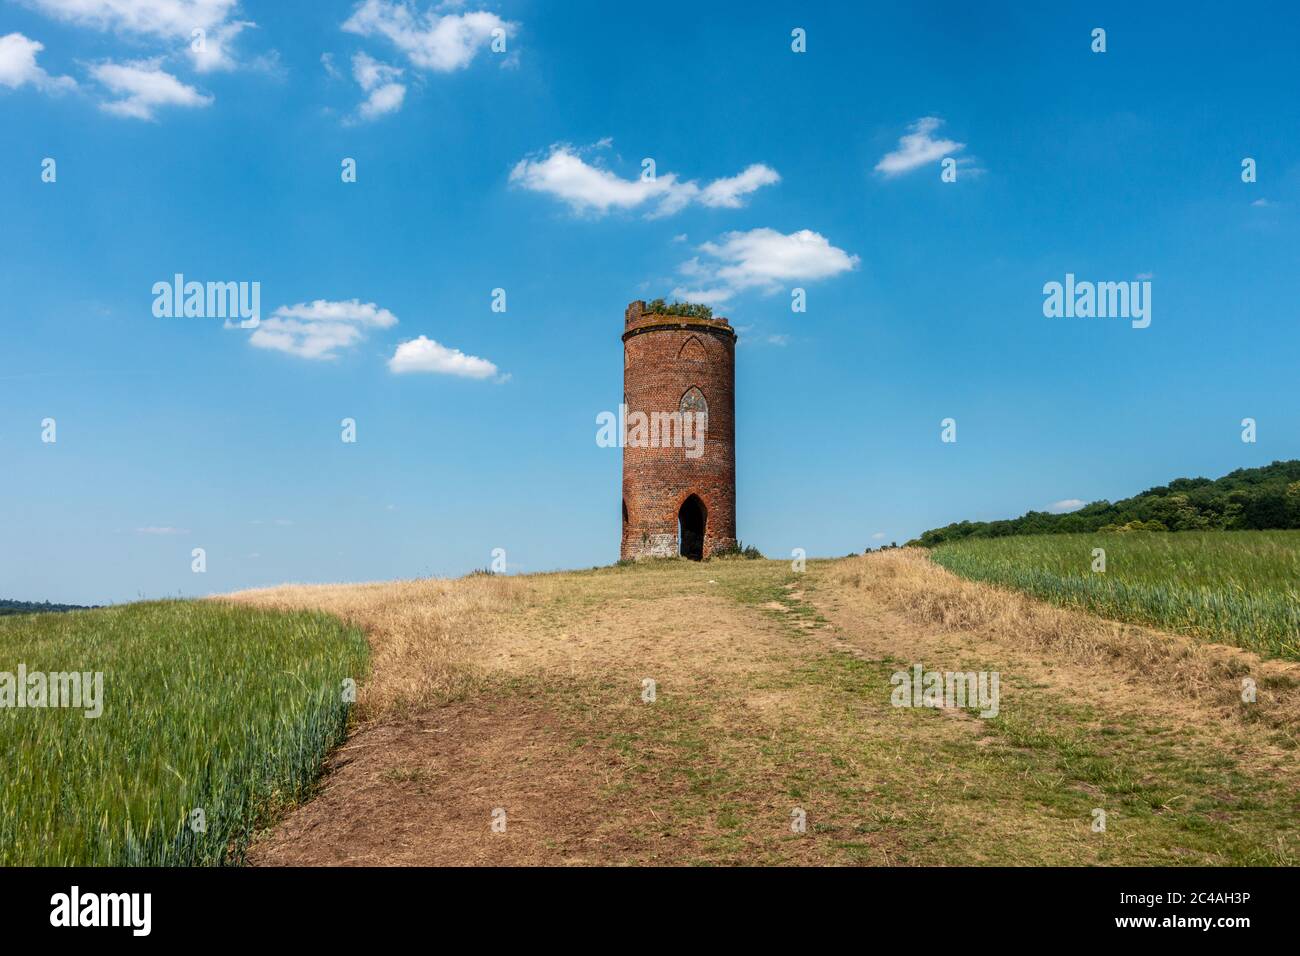 Wilder's Folly on Nuntide Hill at Reading, UK seen in the middle of summer against a blue sky. Stock Photo